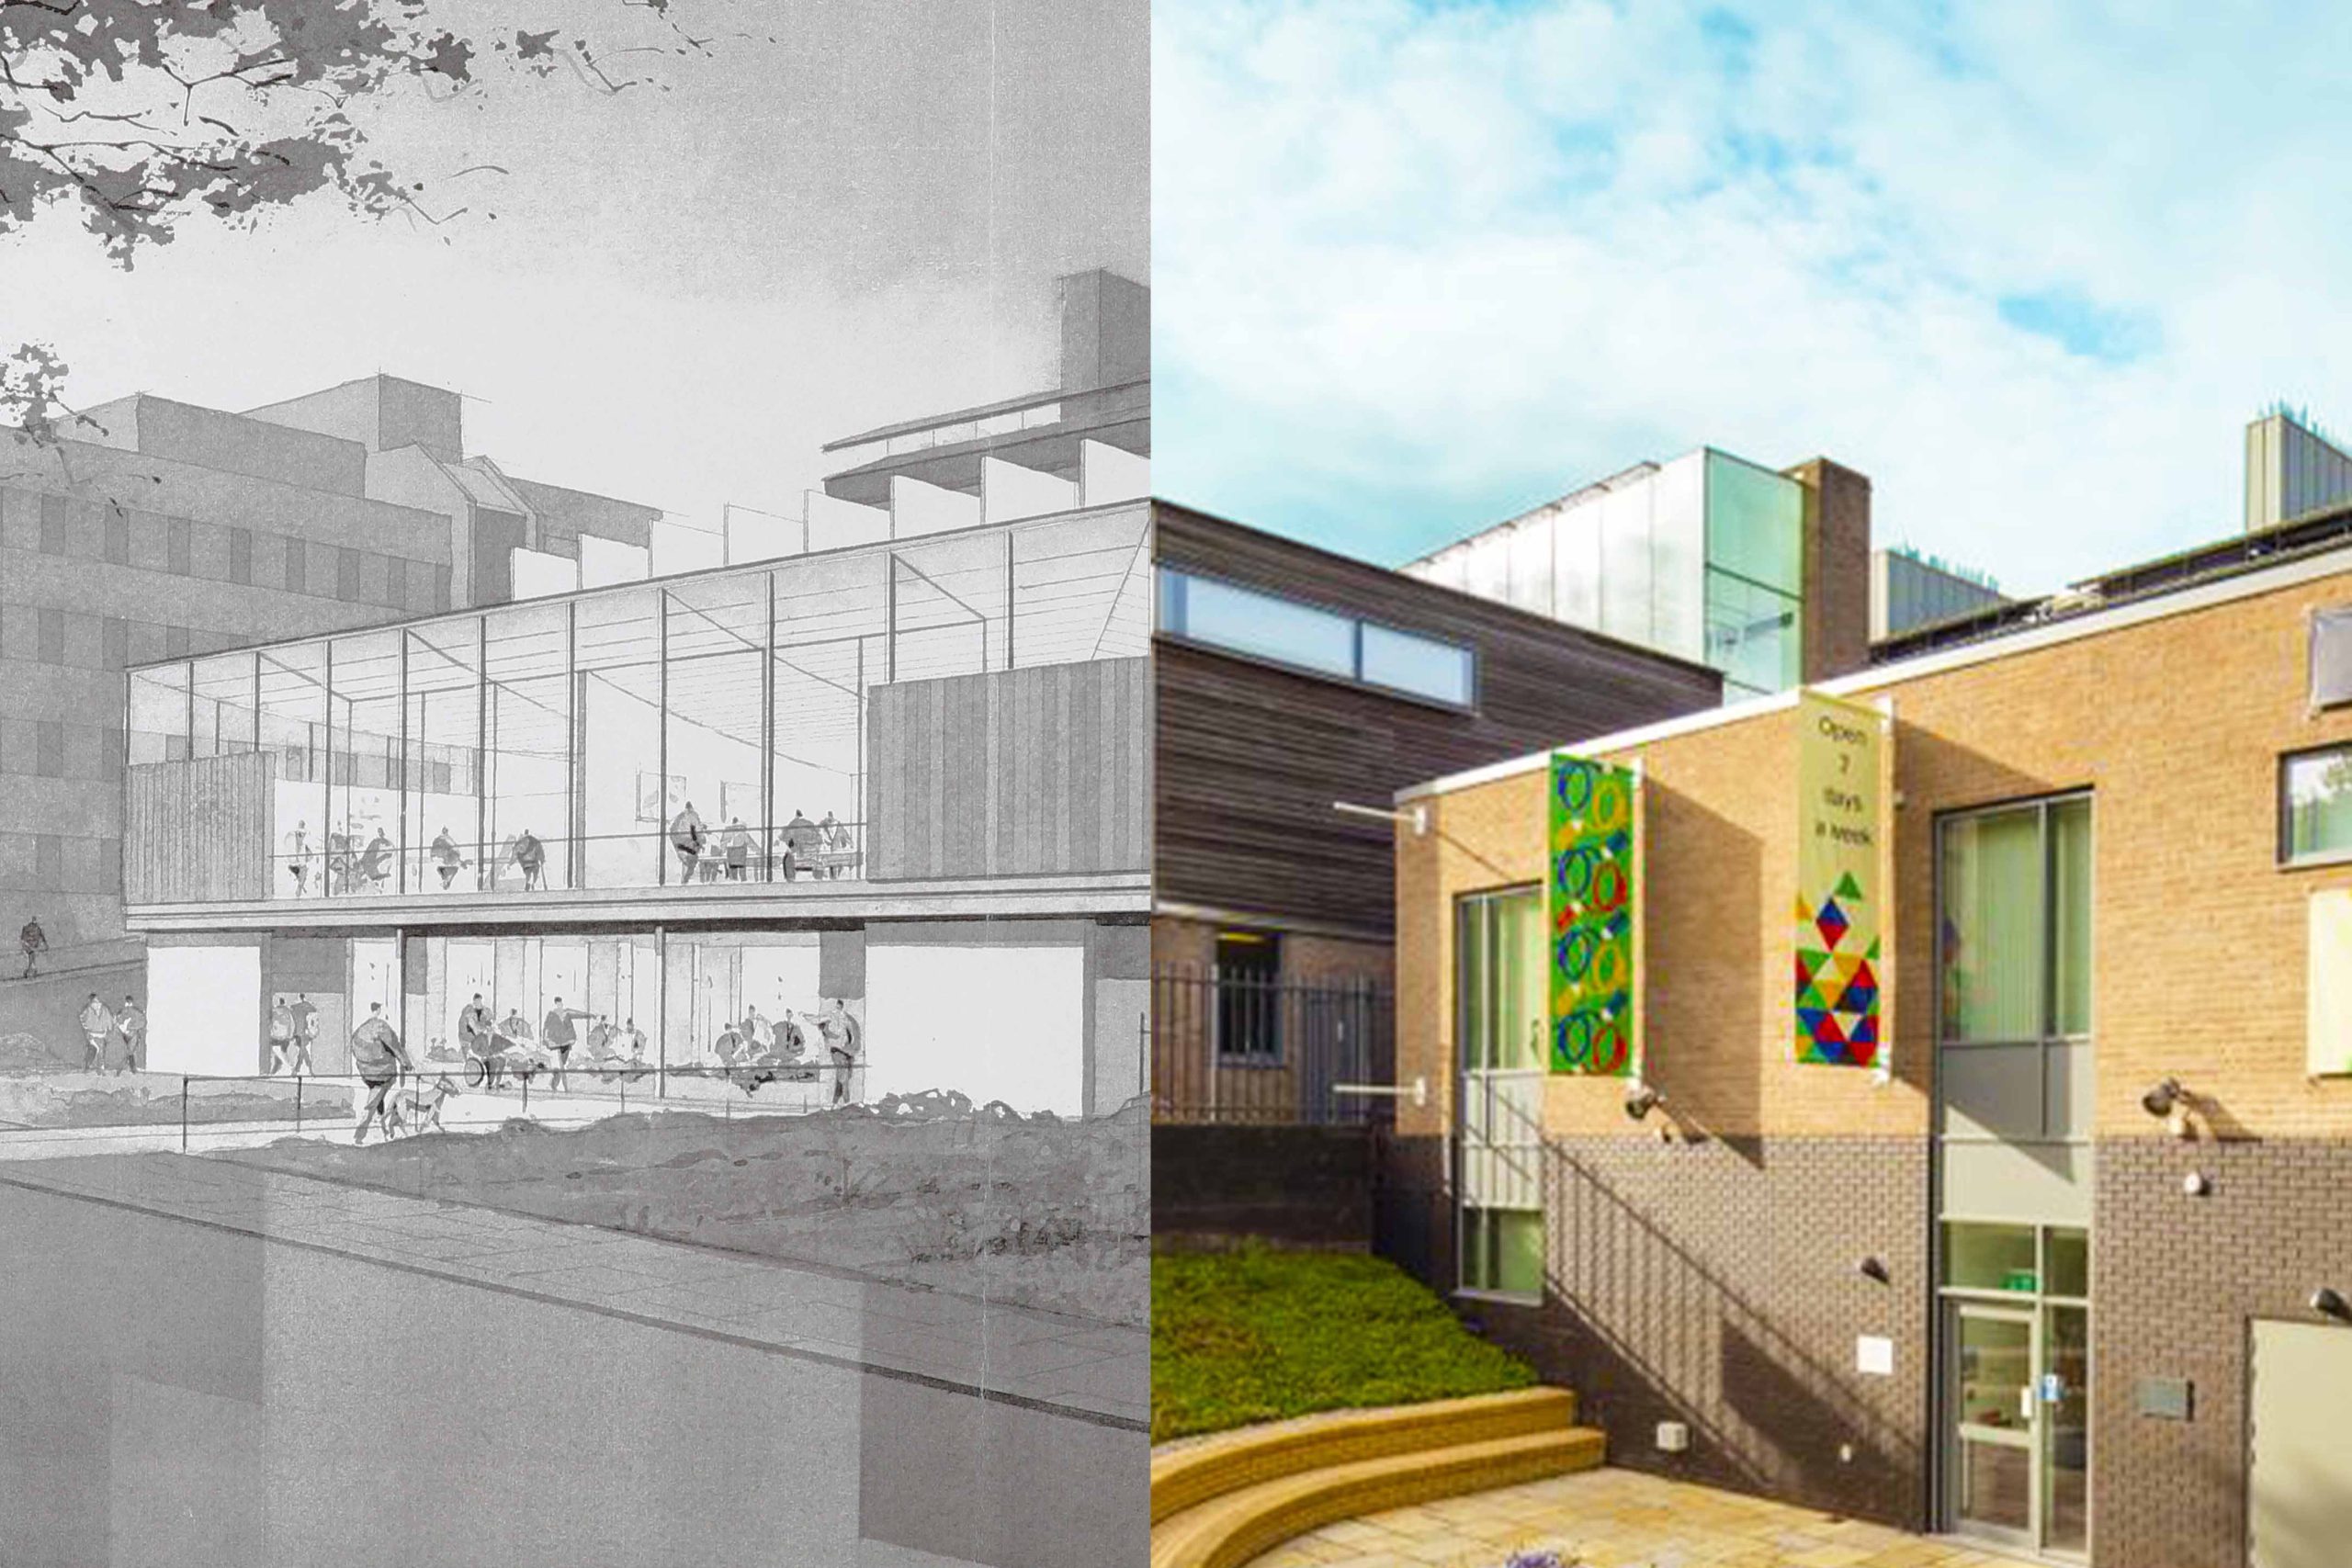 Half of the picture is of an artists rendition of what the Attenborough Arts Centre could be before it was built and the right is a connected picture of the Centre's gallery and building today.